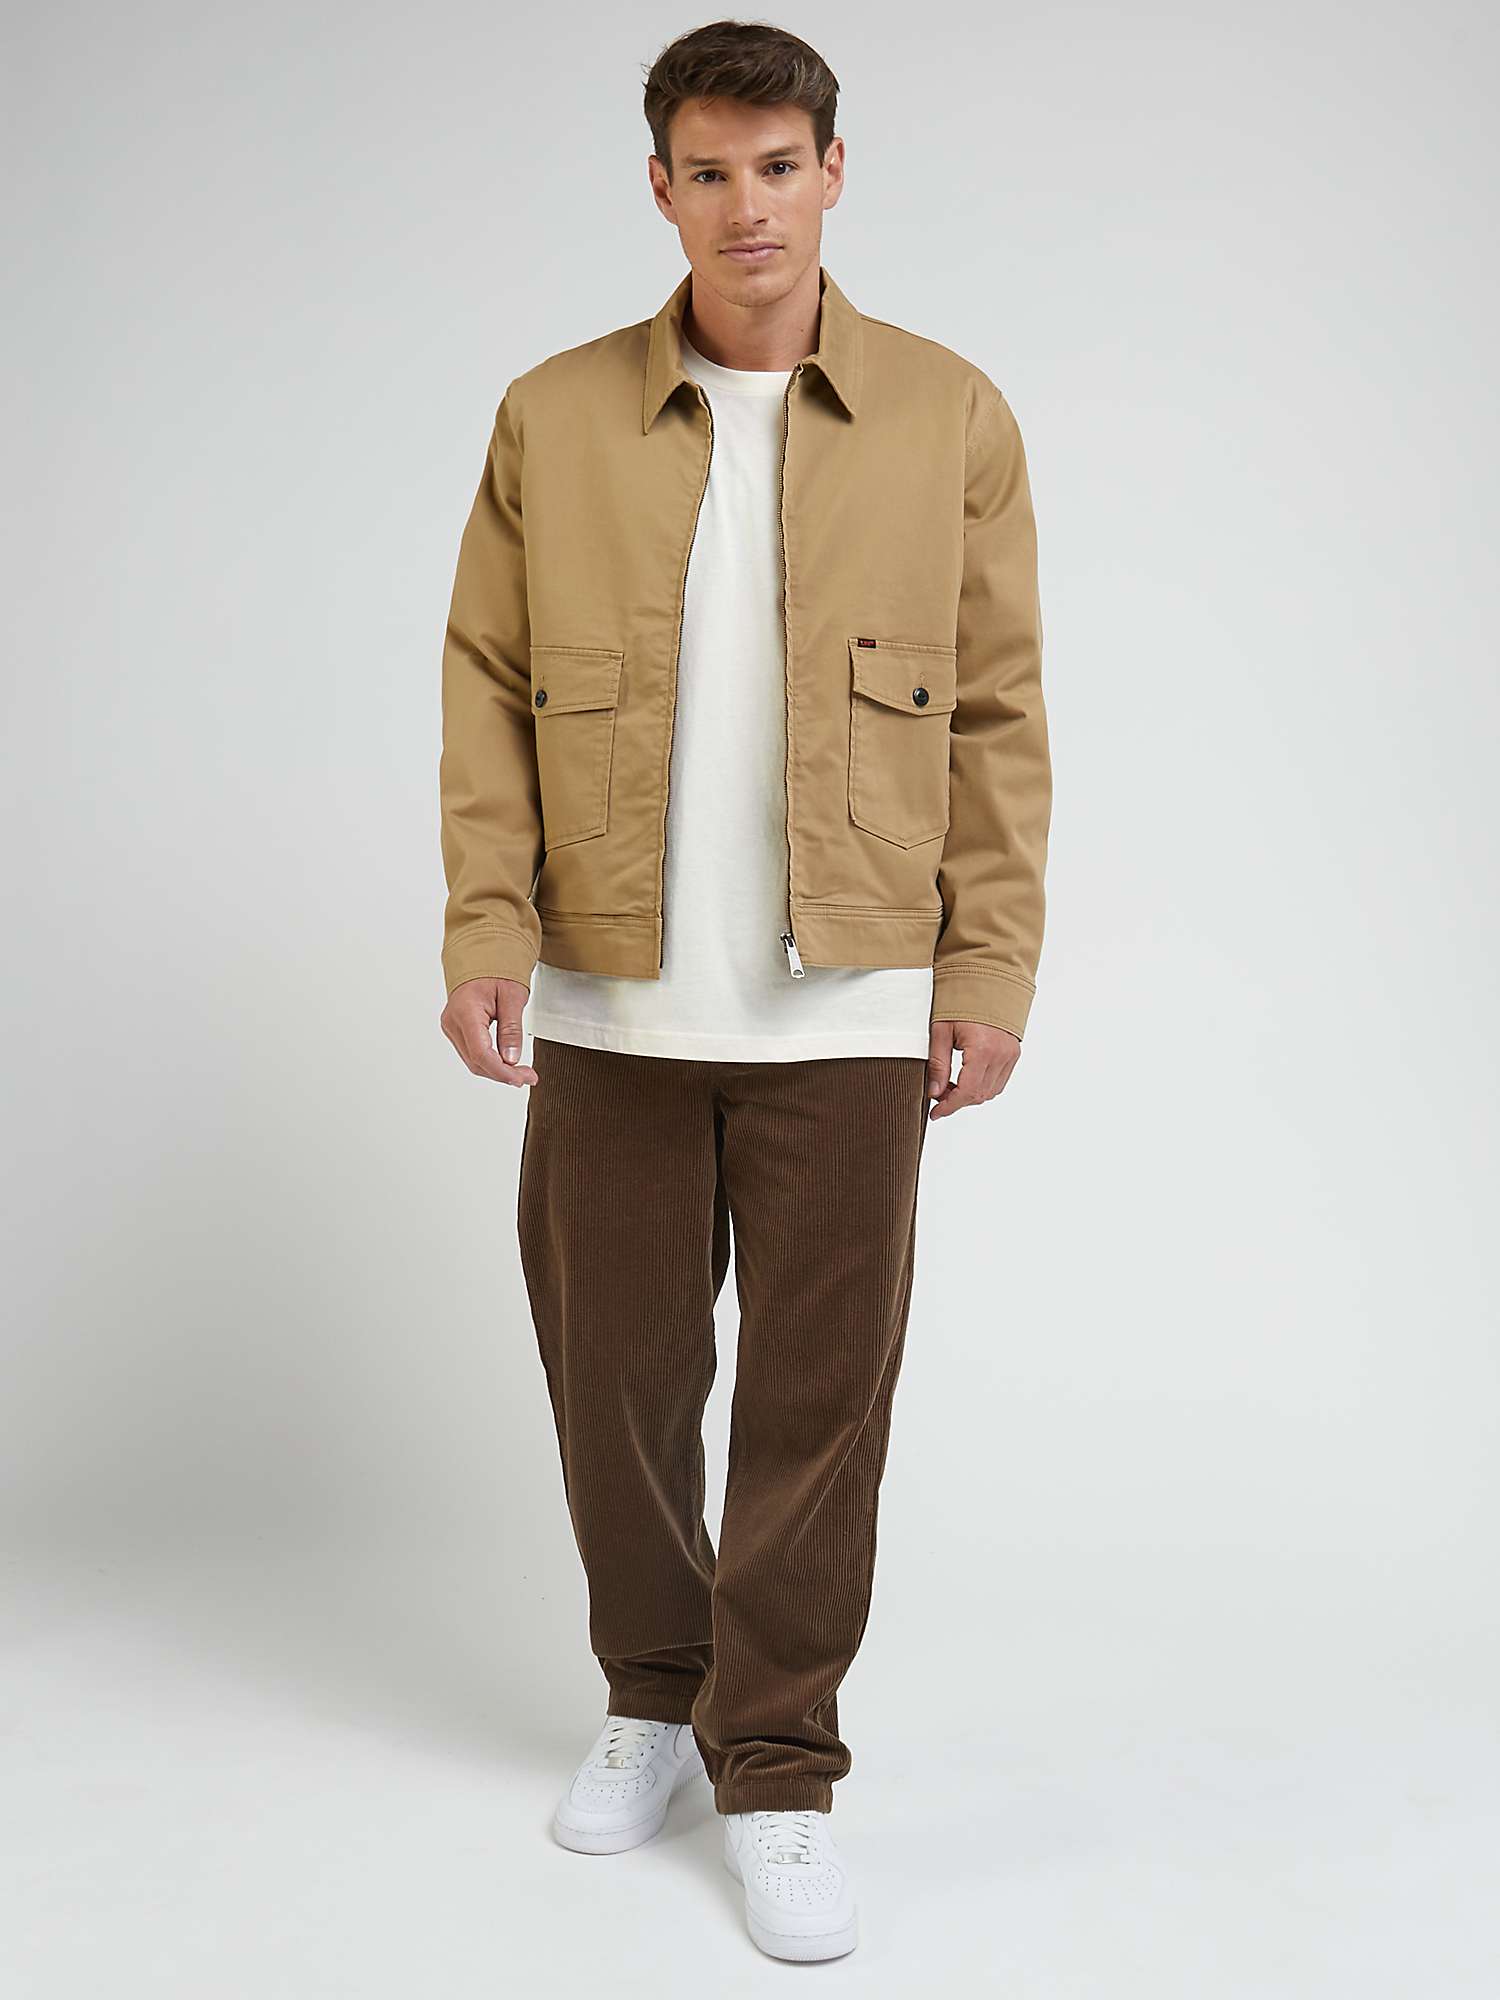 Lee Chetopa Cotton Twill Jacket, Clay at John Lewis & Partners